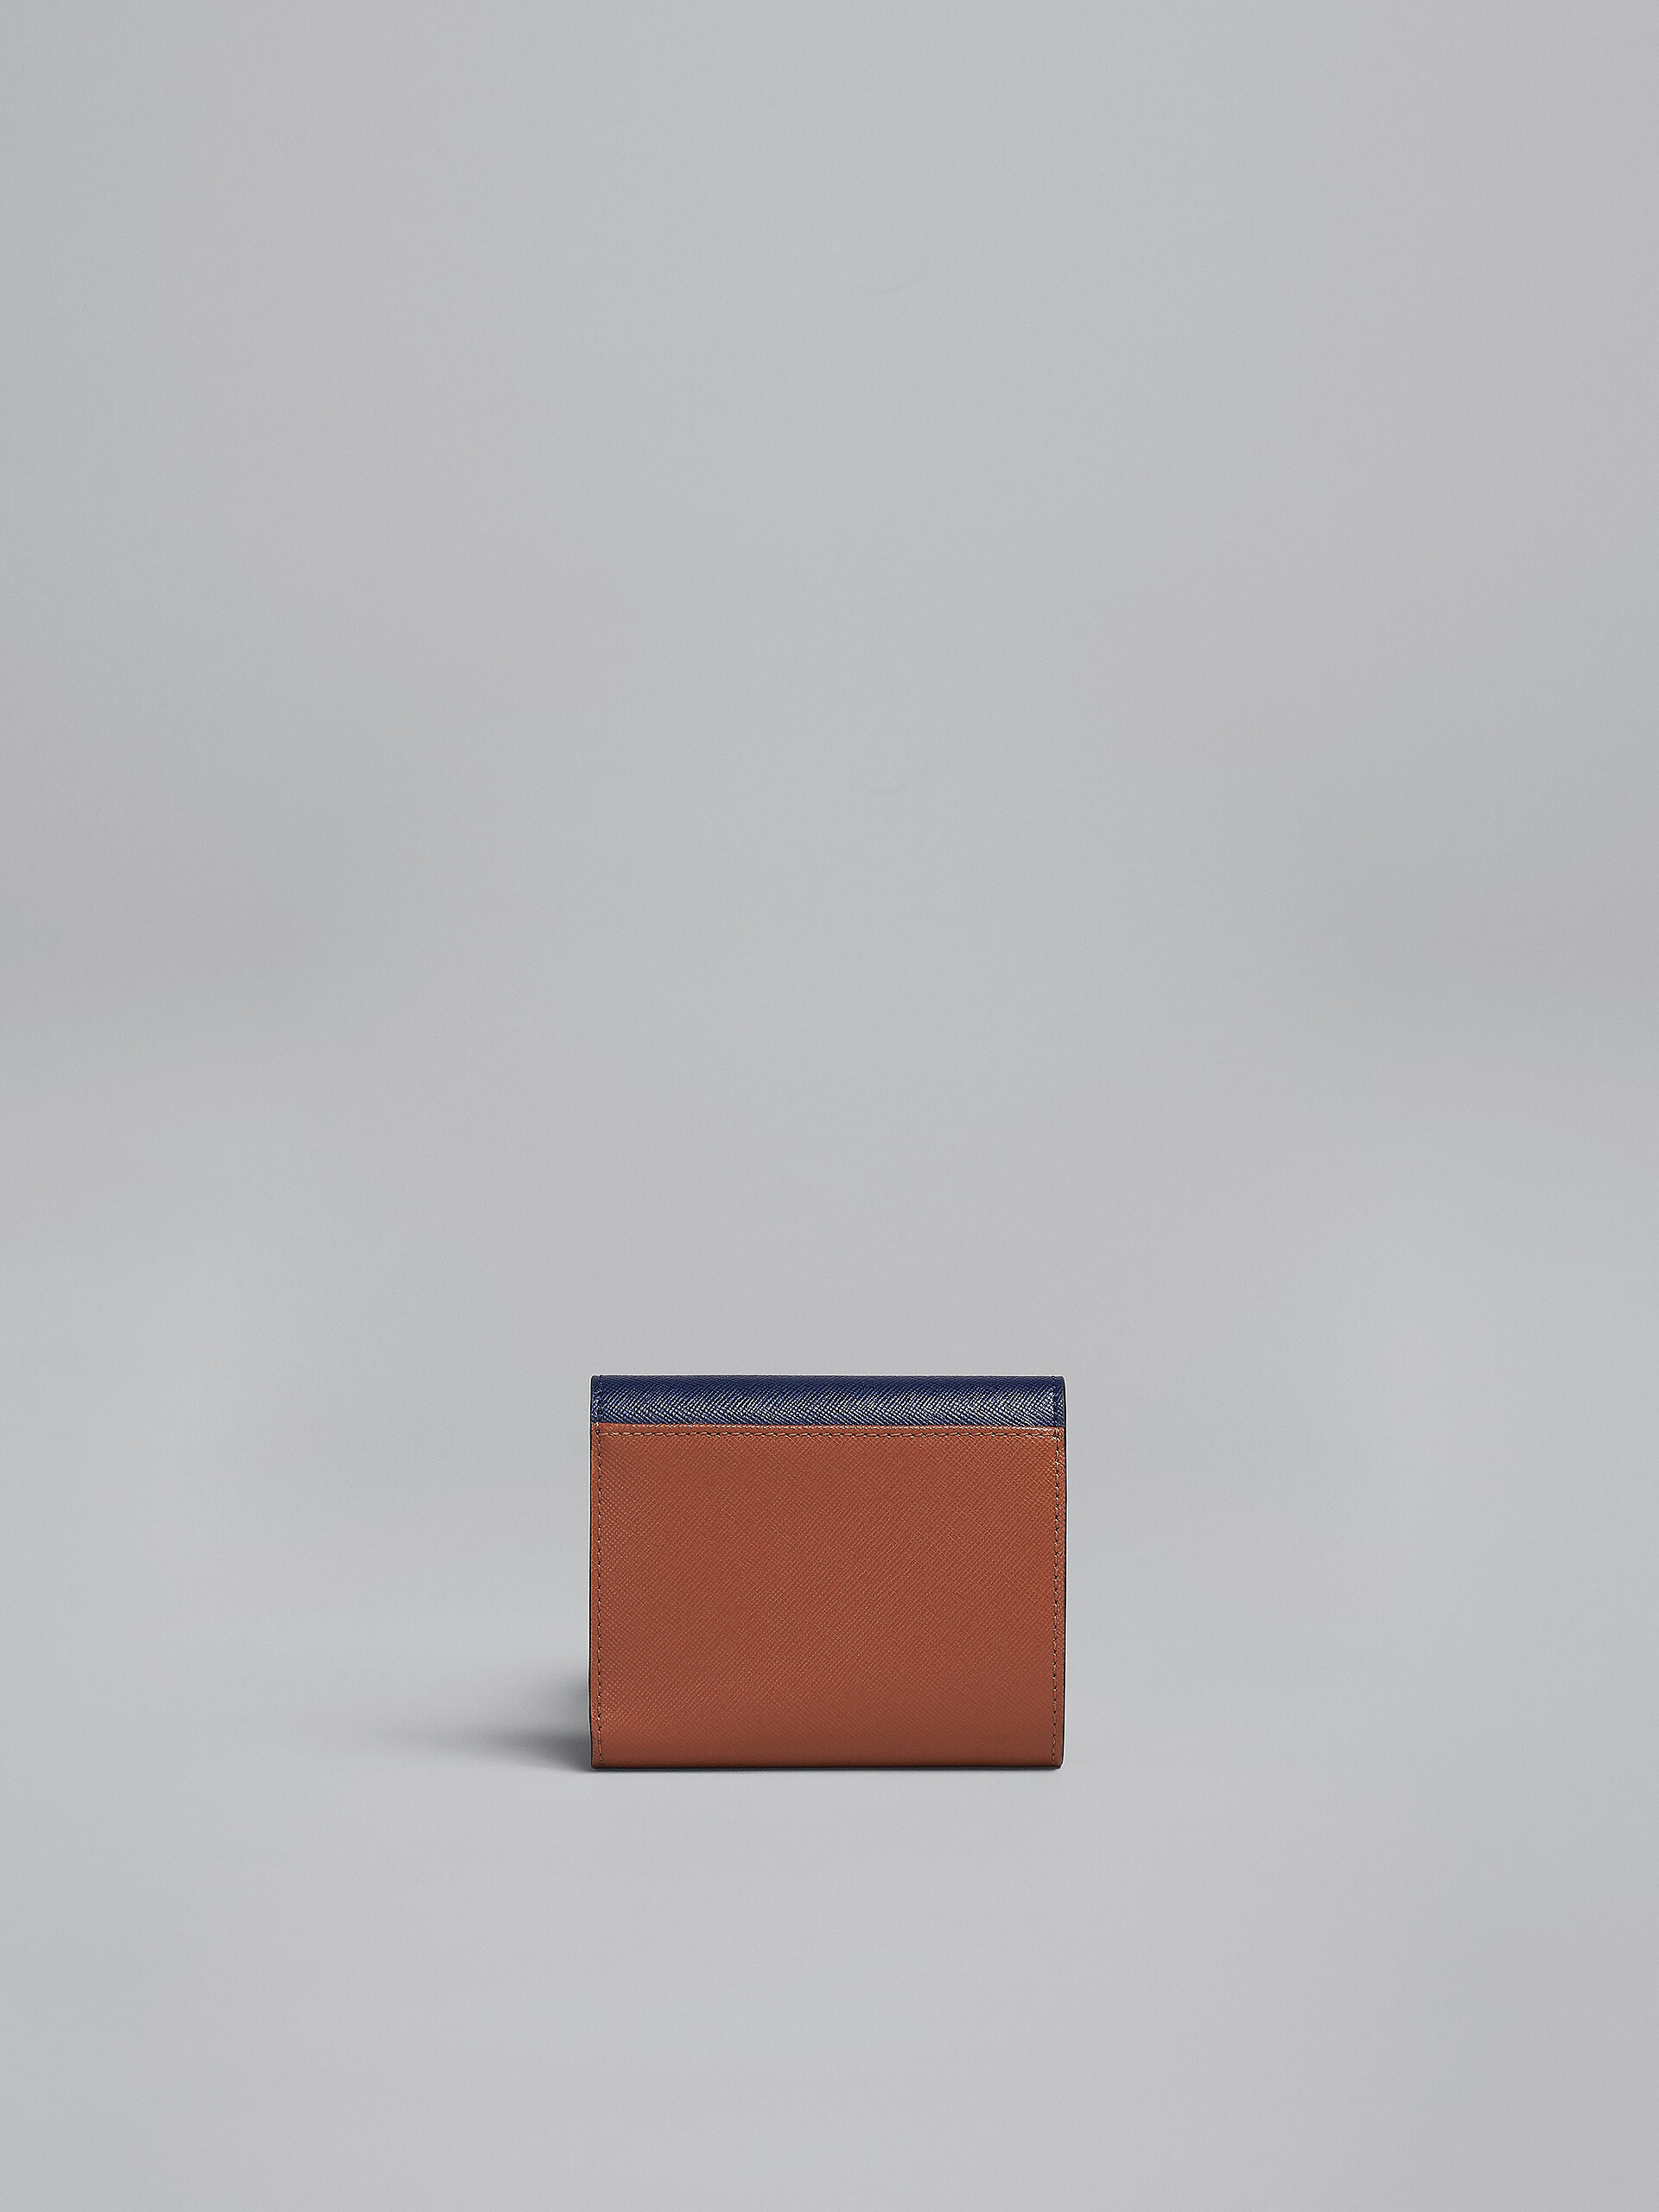 Blue white and brown saffiano leather tri-fold wallet - Wallets - Image 3